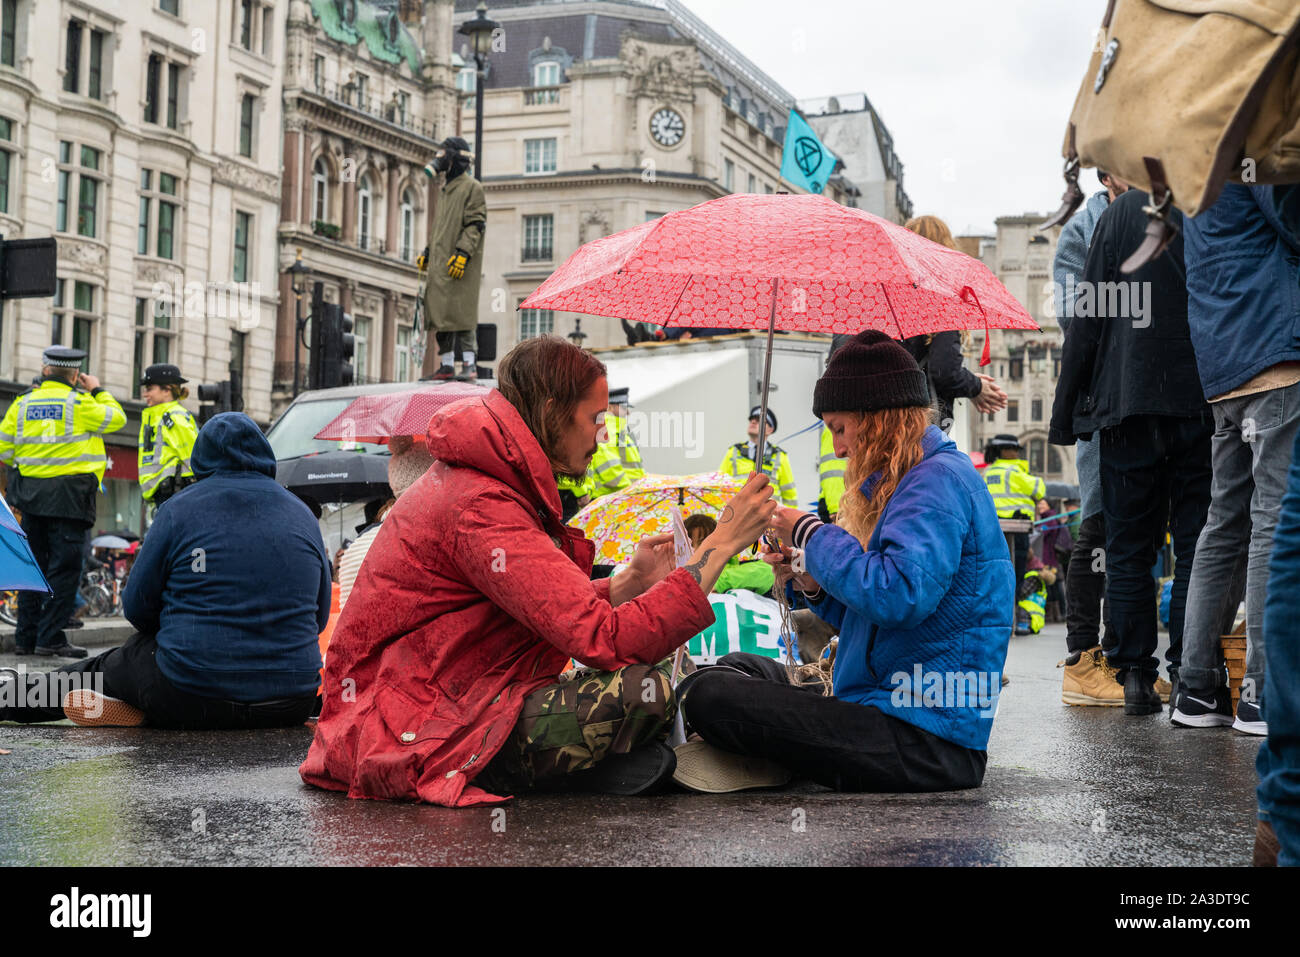 7th Oct 2019 - London, UK. A protesters share an umbrella while blocking the road during Extinction Rebellion climate protest in London. Stock Photo